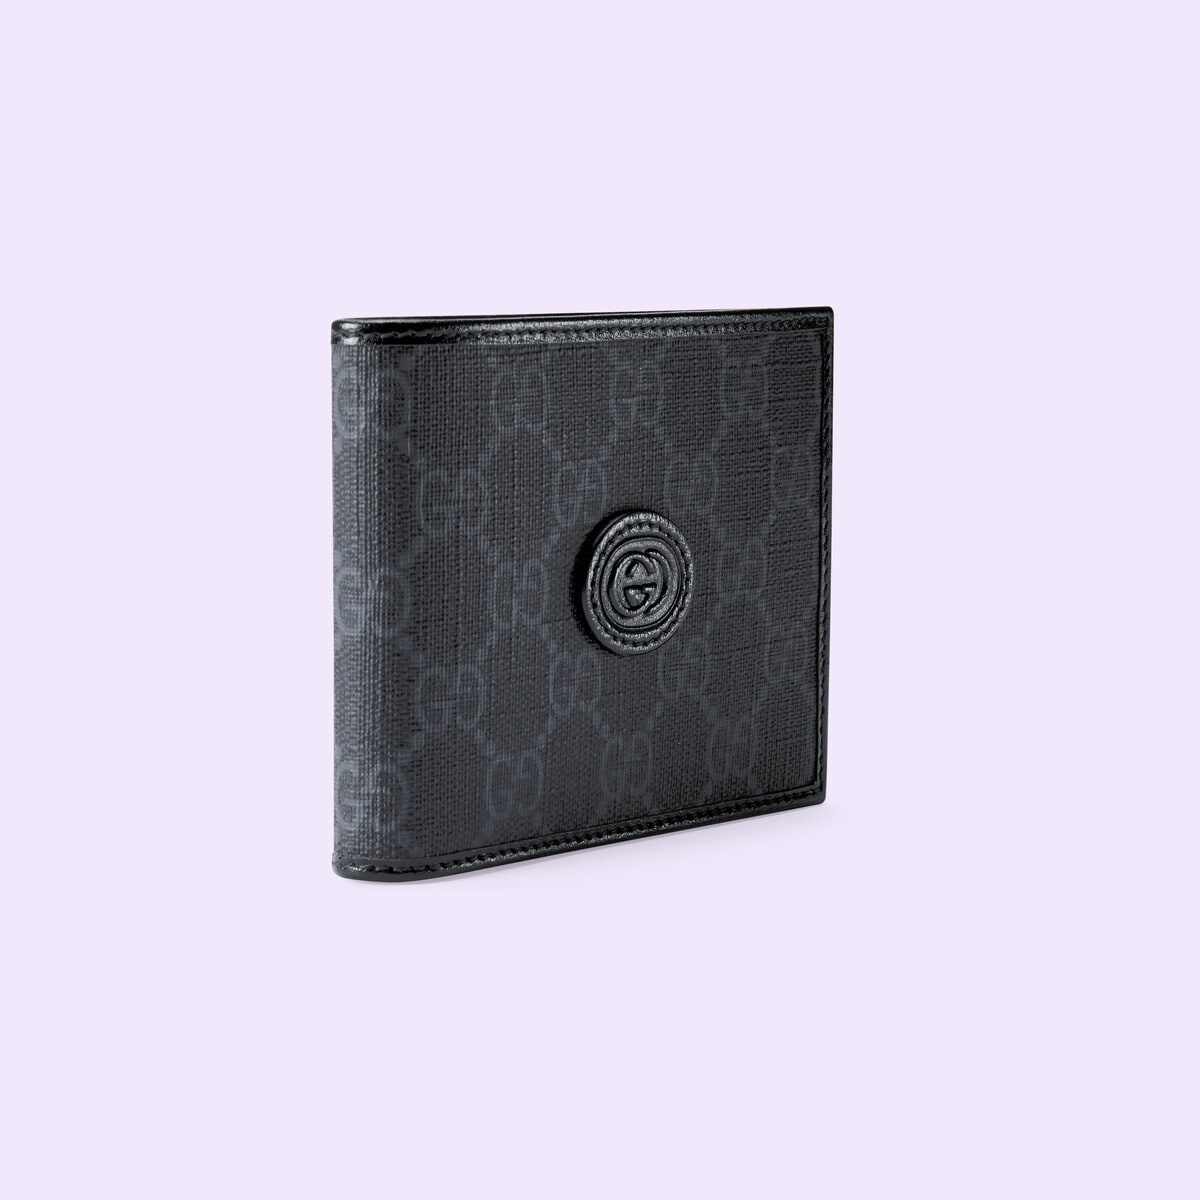 GG wallet with removable card case - 3